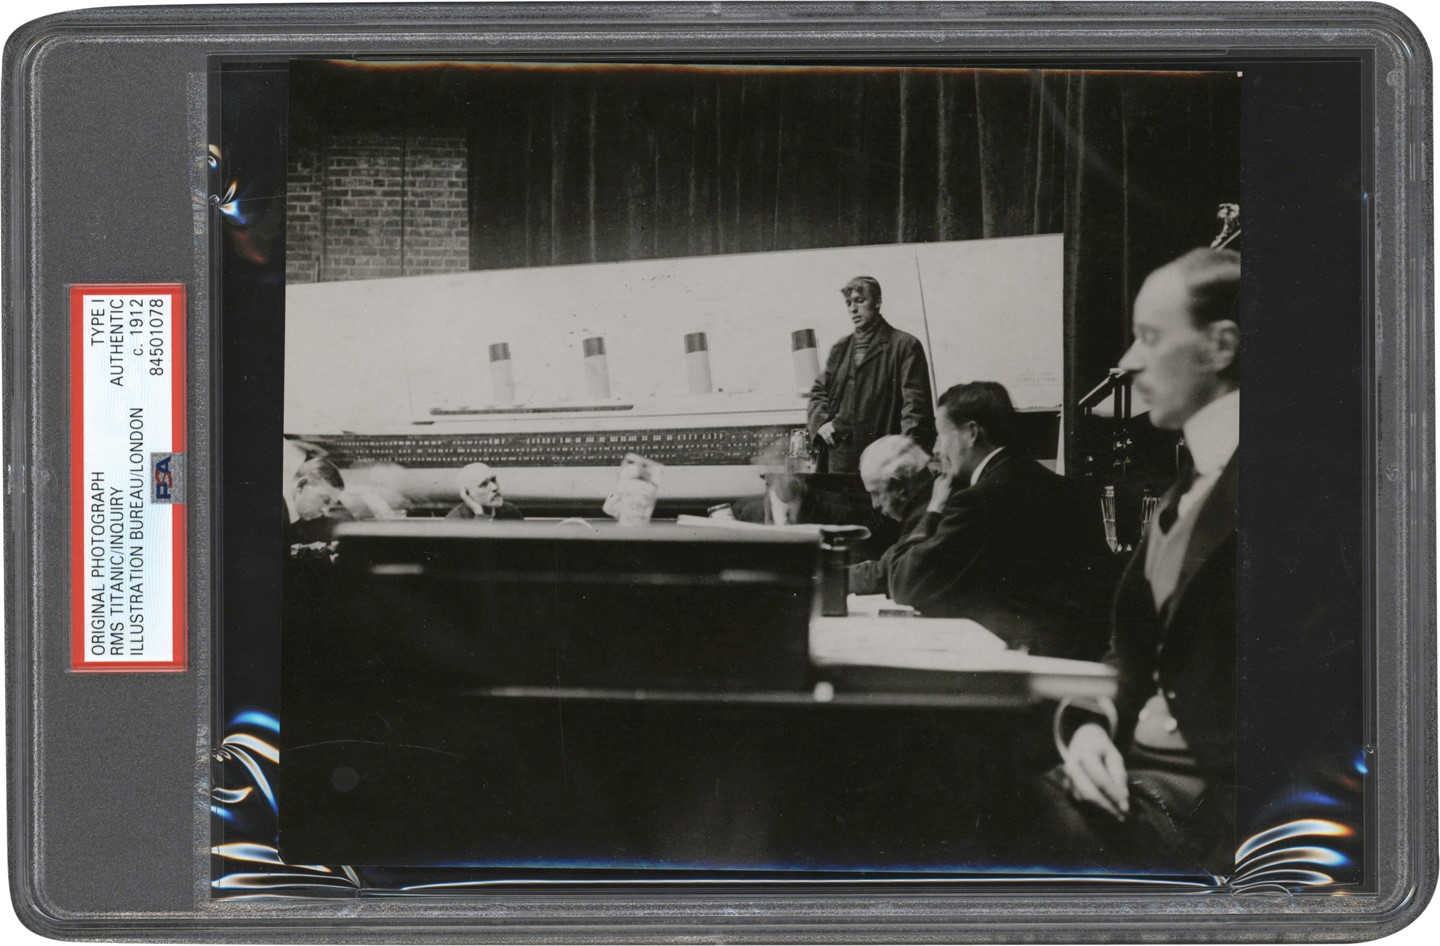 - 1912 Titanic Inquiry Photograph (PSA Type I) - Lookout Man Gives Testimony